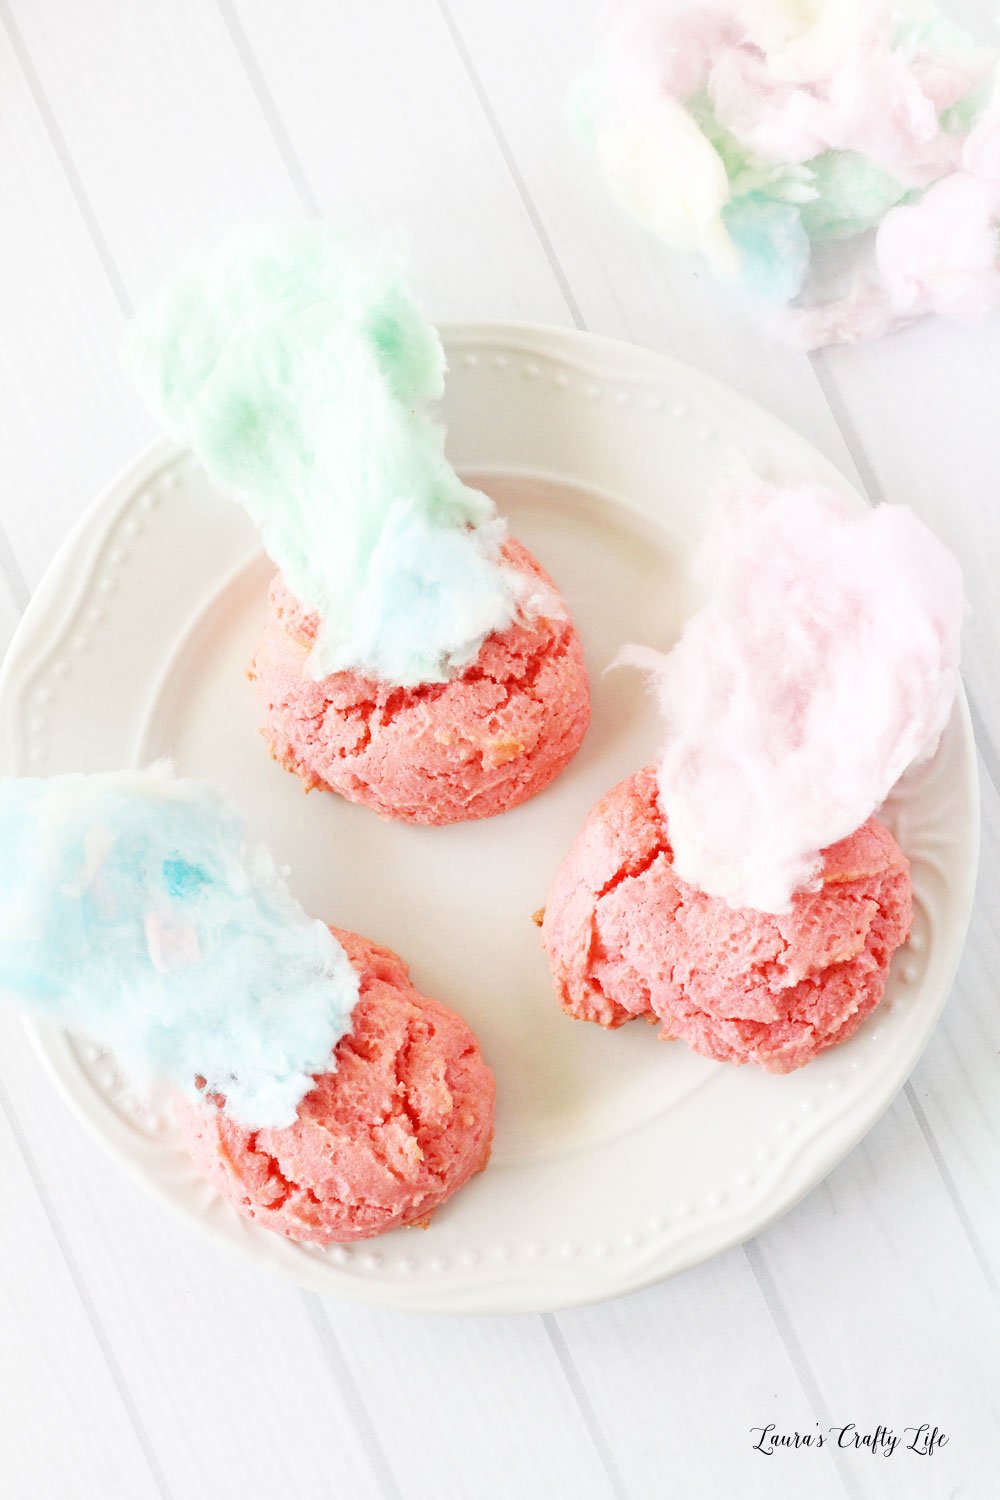 Trolls cookie recipe made with cake batter and cotton candy